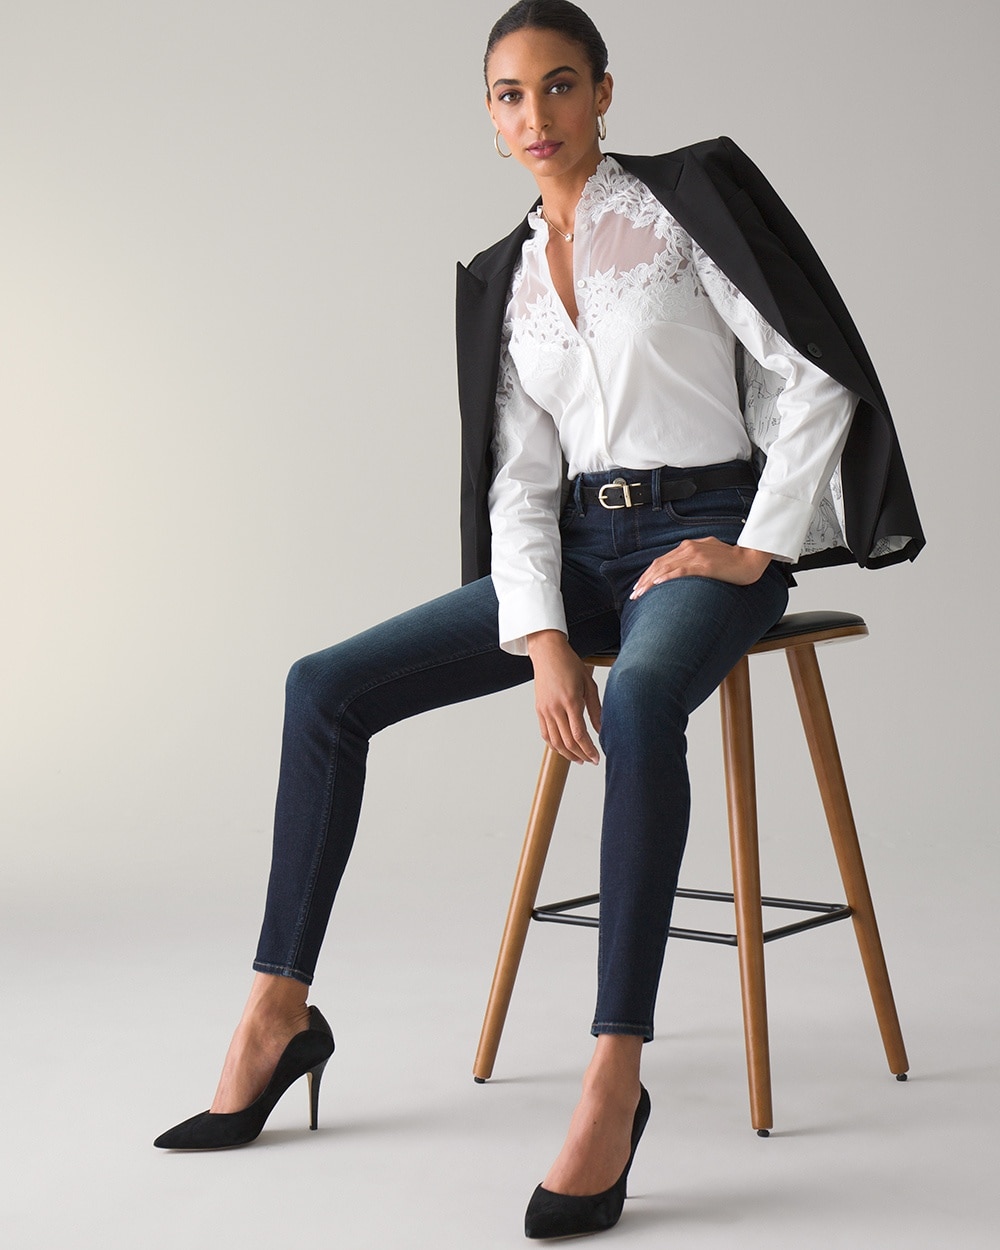 High-Rise Everyday Soft Denim\u2122 Super Skinny Jeans video preview image, click to start video